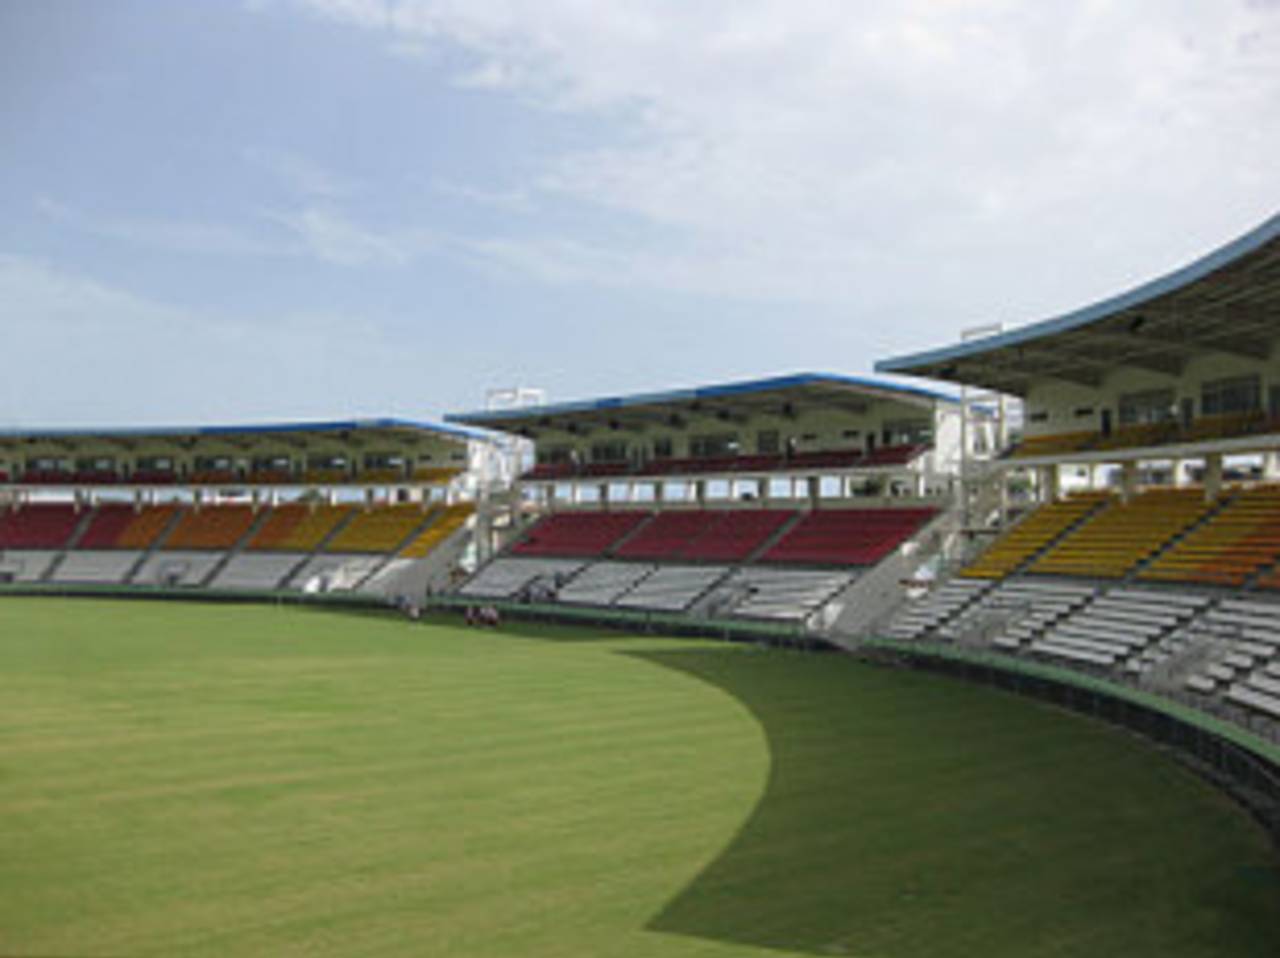 A view of the stands at Windsor Park, Roseau, July 24, 2009